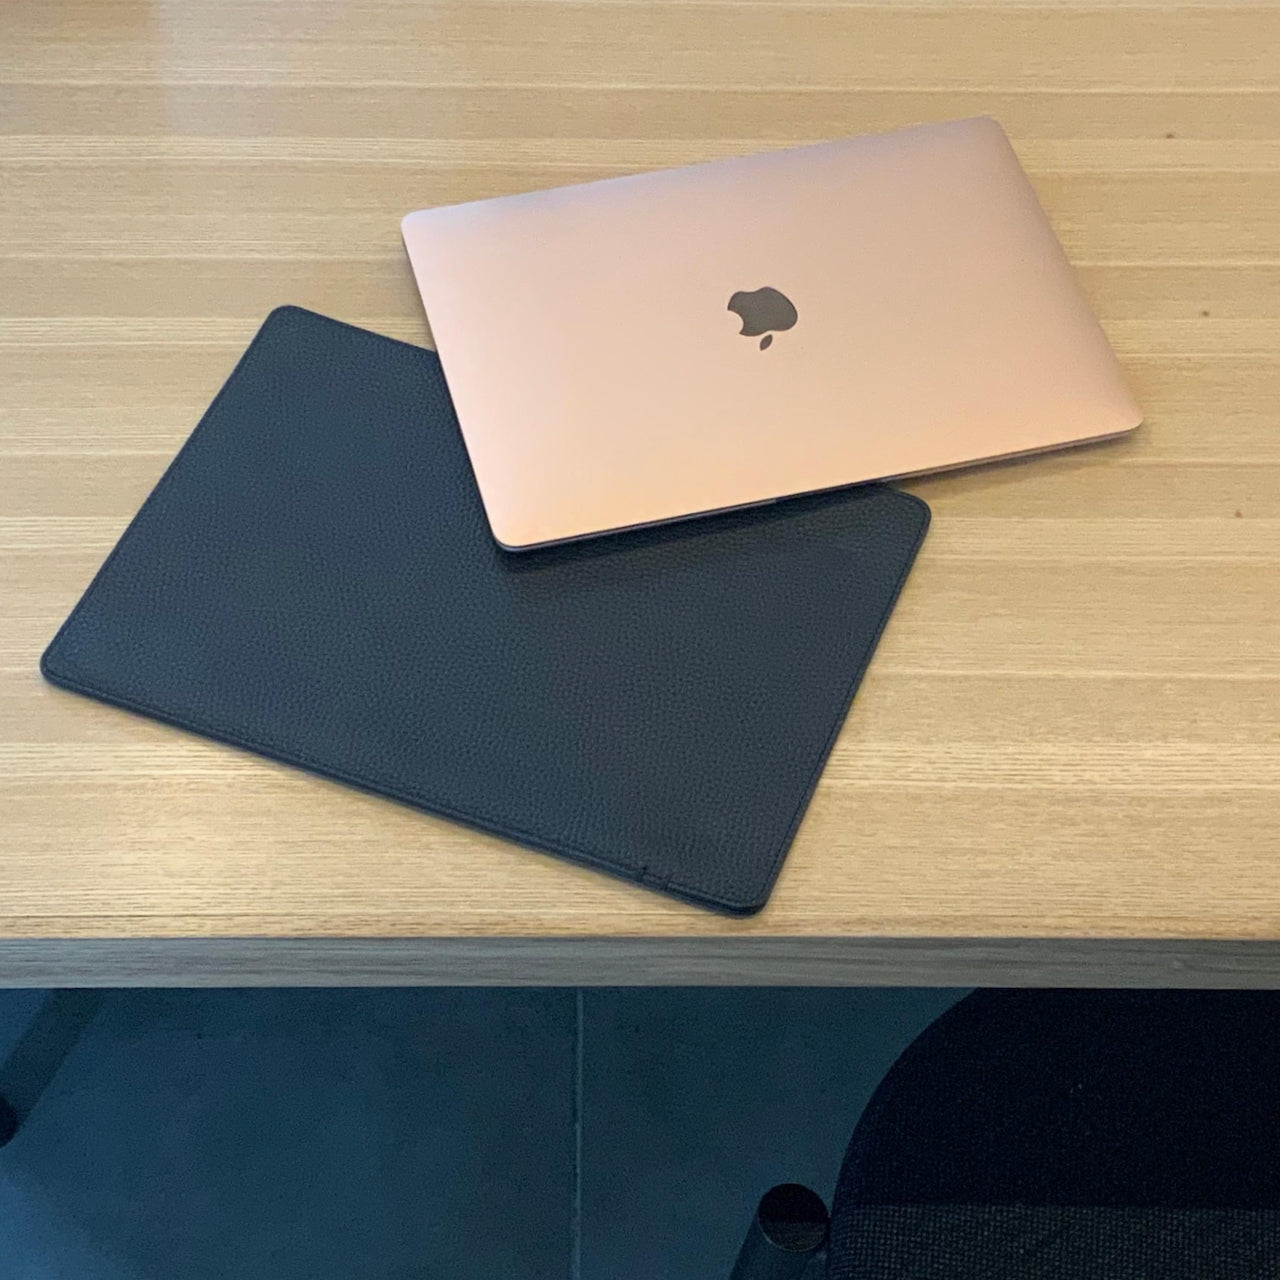 MacBook Pro 16 inches is a slim, thin but solid sleeve case